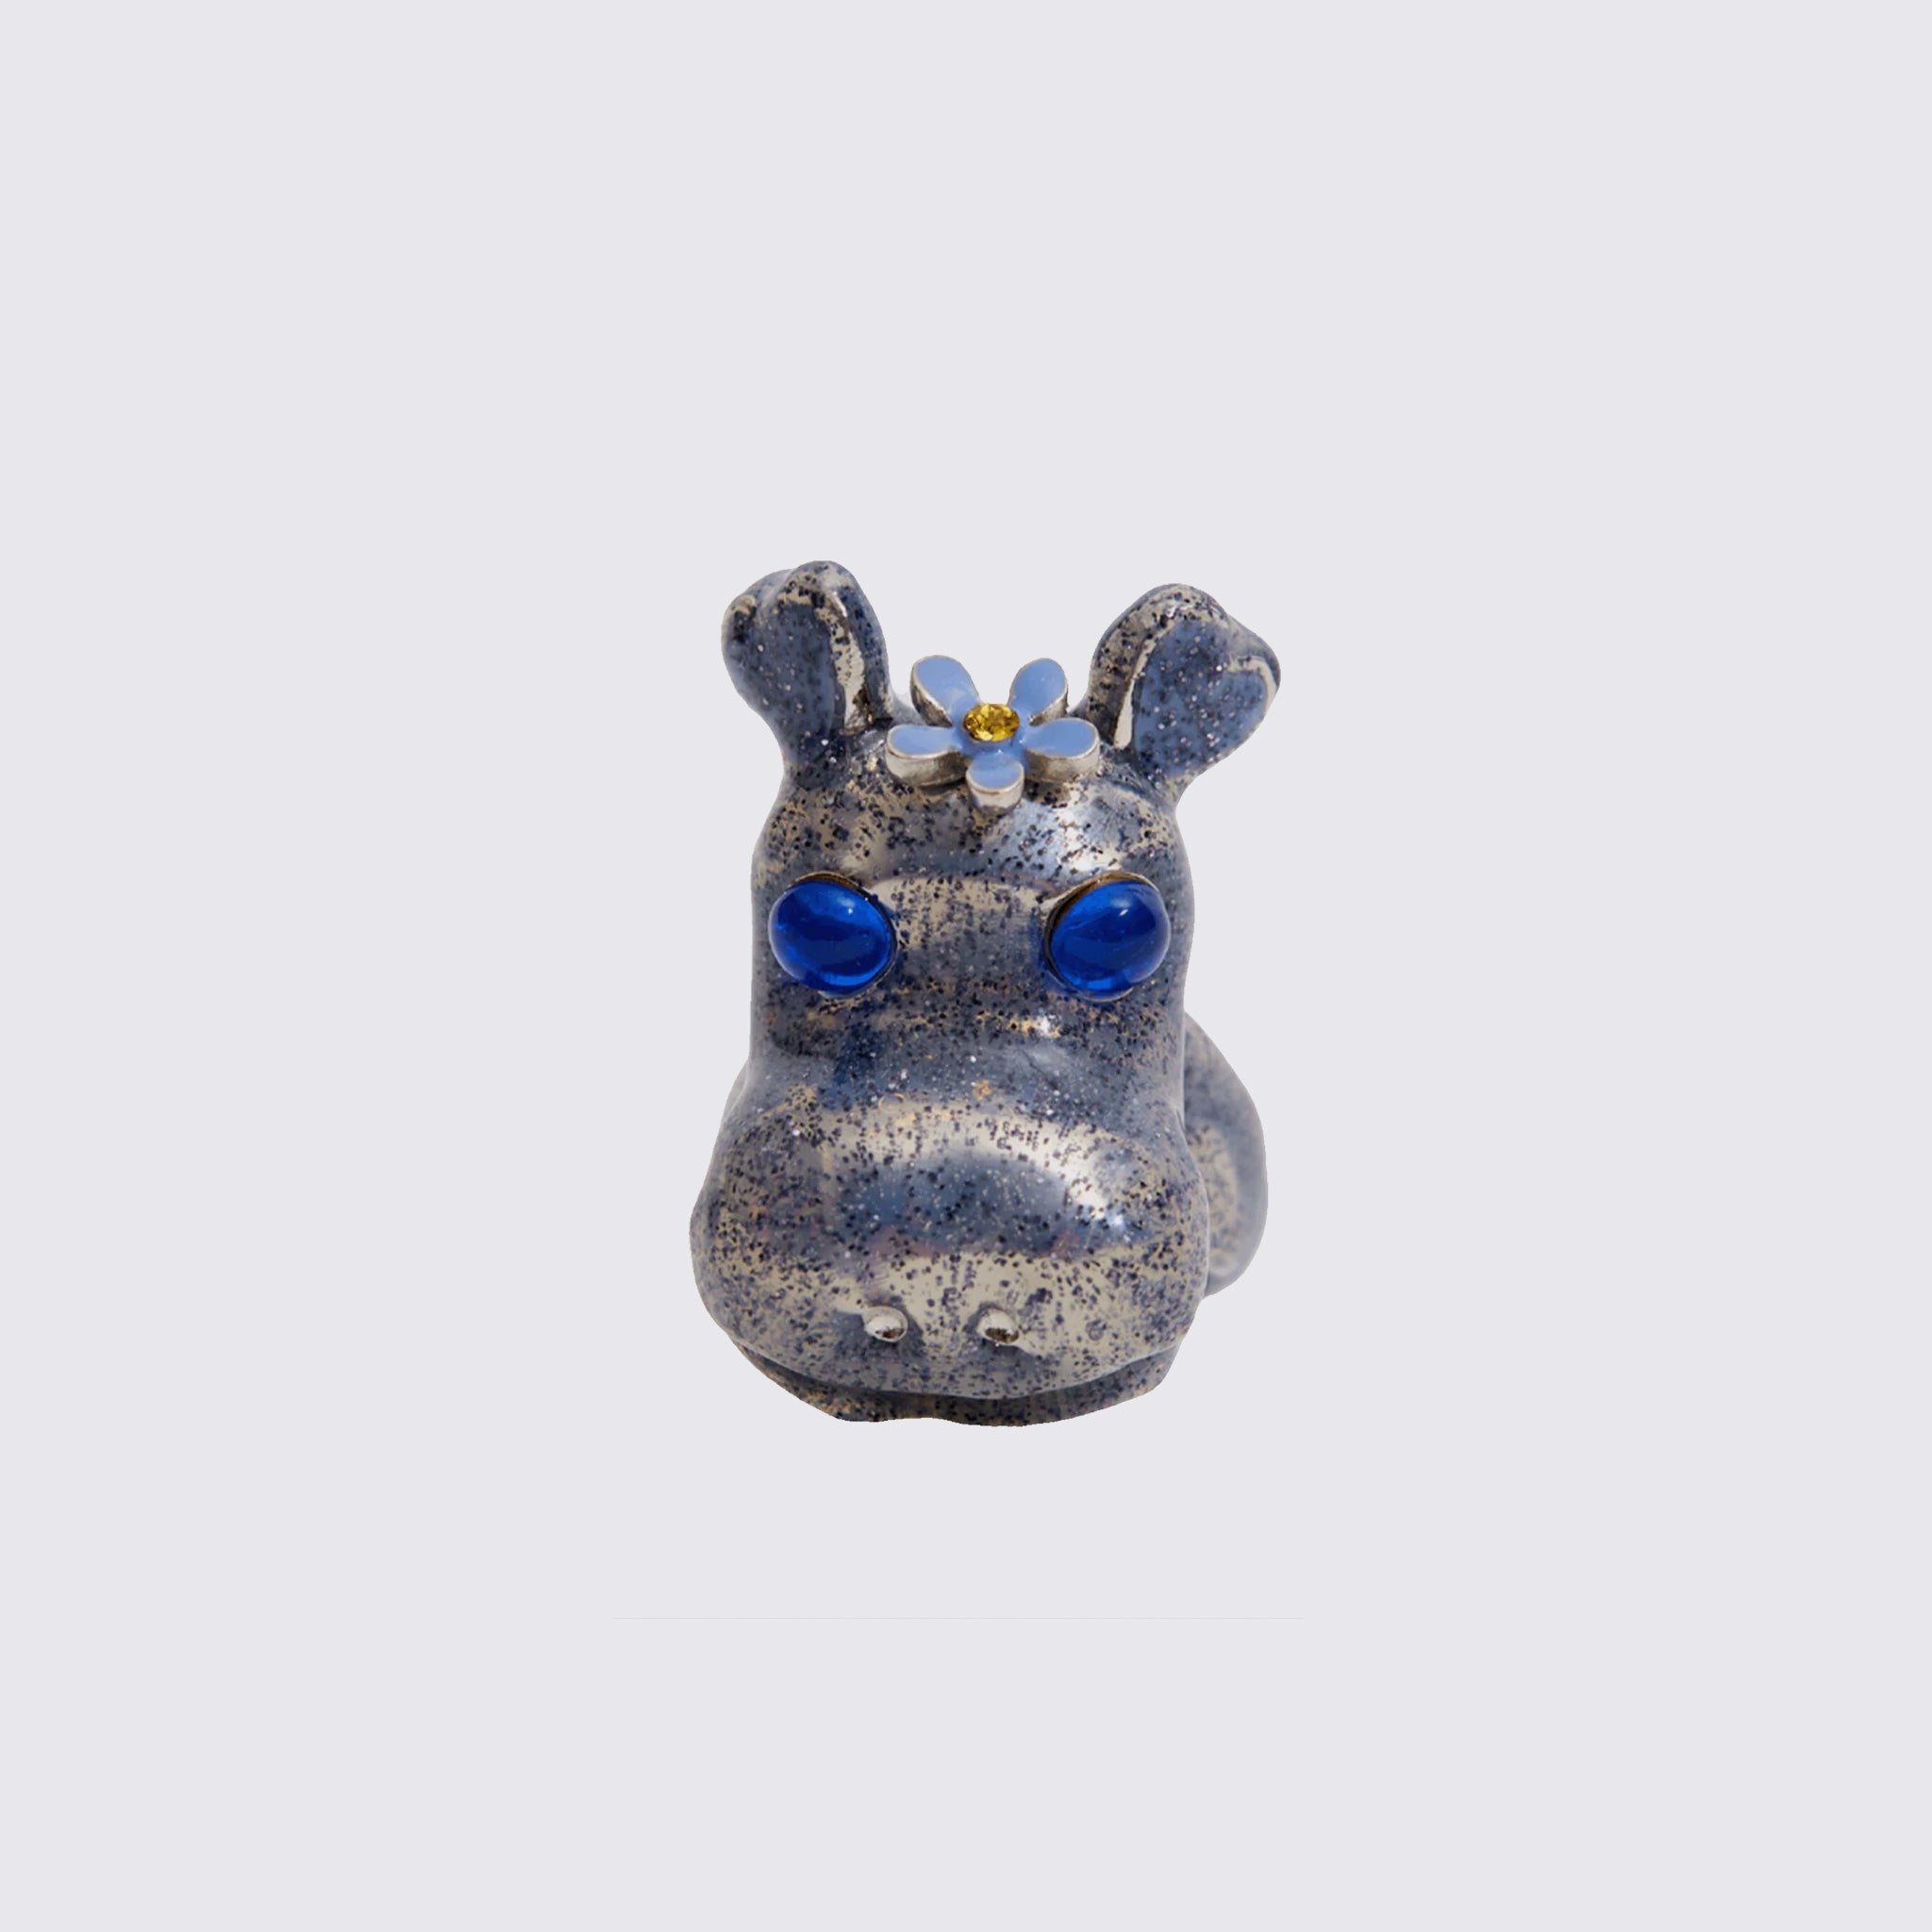 Hippo Ring, a recycled pewter ring formed in the shape of a hippopotamus head, enameled in blue and white speckled paint with blue glass eyes.